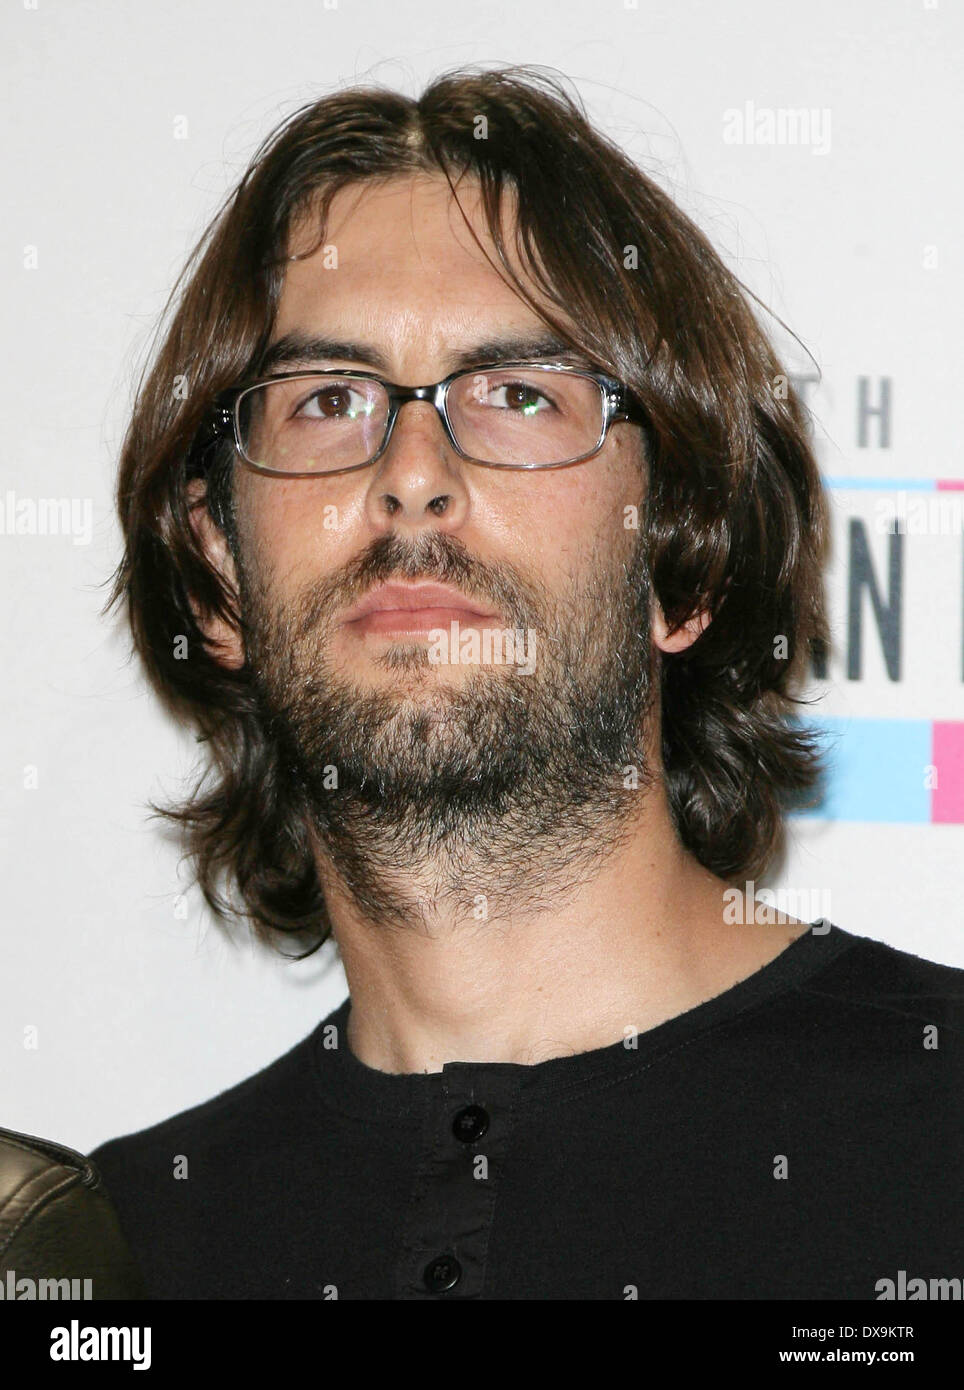 Rob Bourdon of 'Linkin Park' he 40th Anniversary American Music Awards 2012, held at Nokia Theatre L.A. Live - Pressroom Los Angeles, California - 18.11.12 Featuring: Rob Bourdon of 'Linkin Park' Where: Los Angeles, California, United States When: 18 Nov 2012 Stock Photo